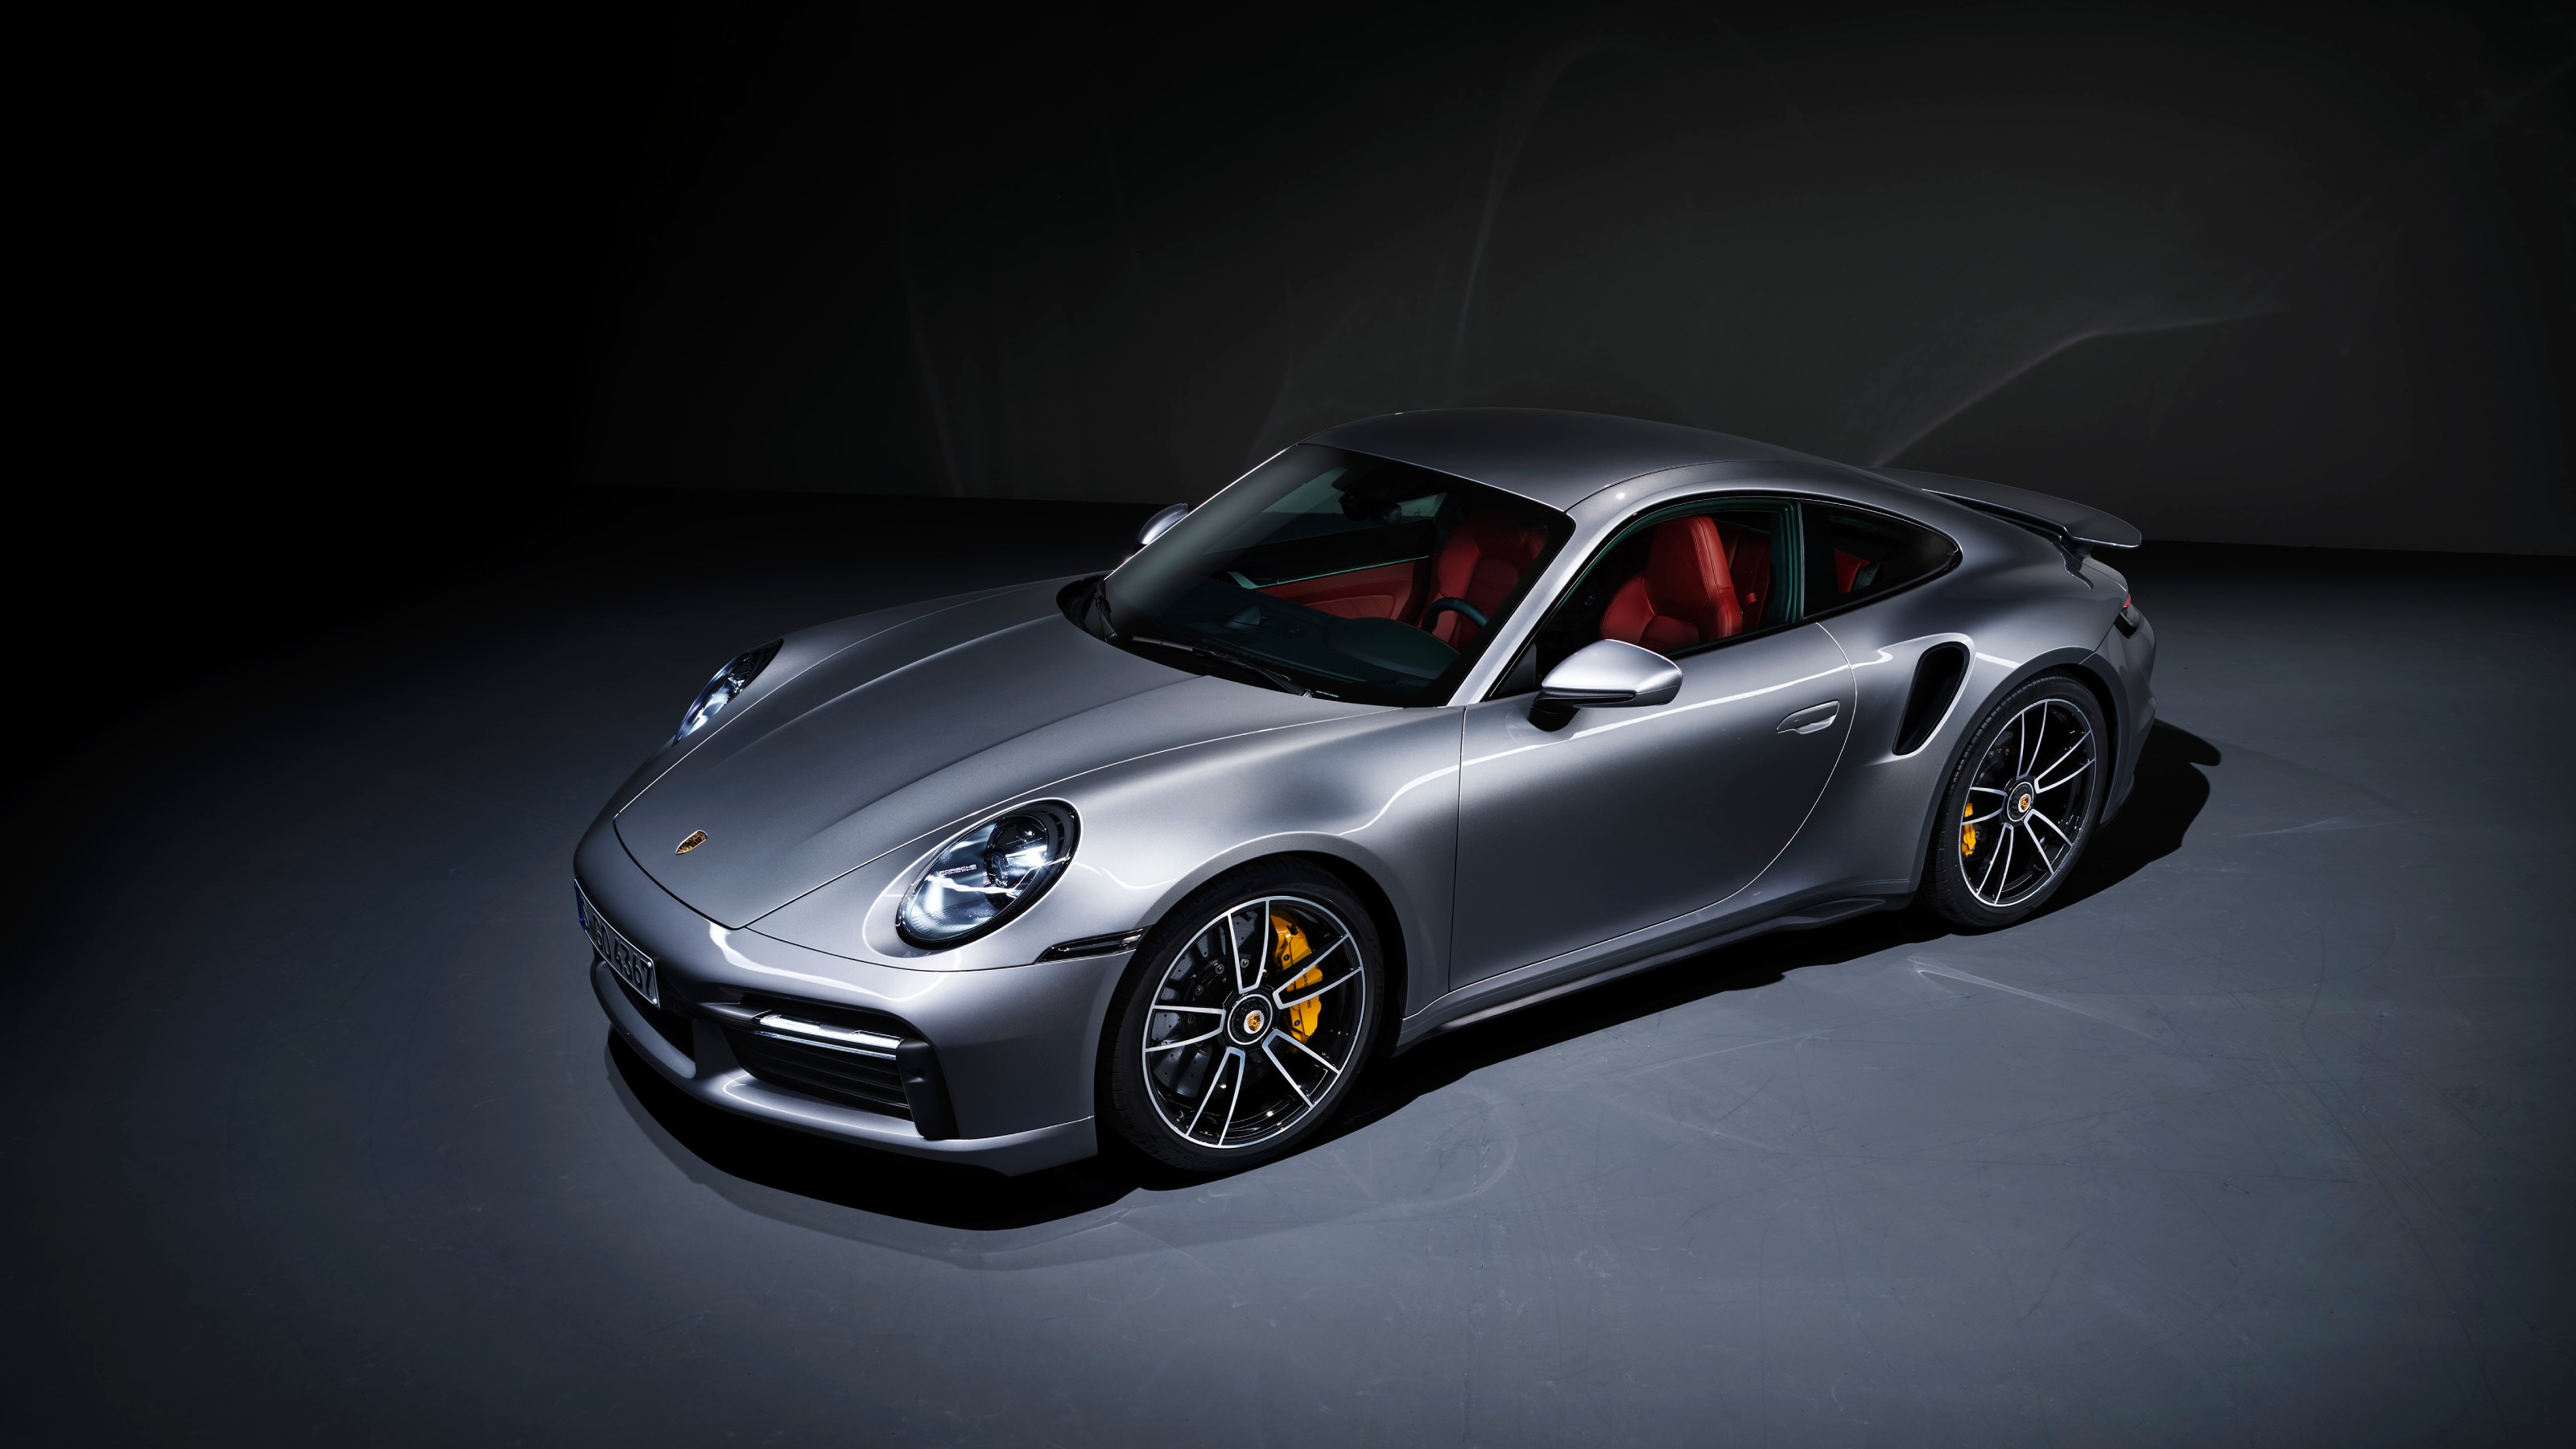 Defining the Porsche 911: New vs. Old